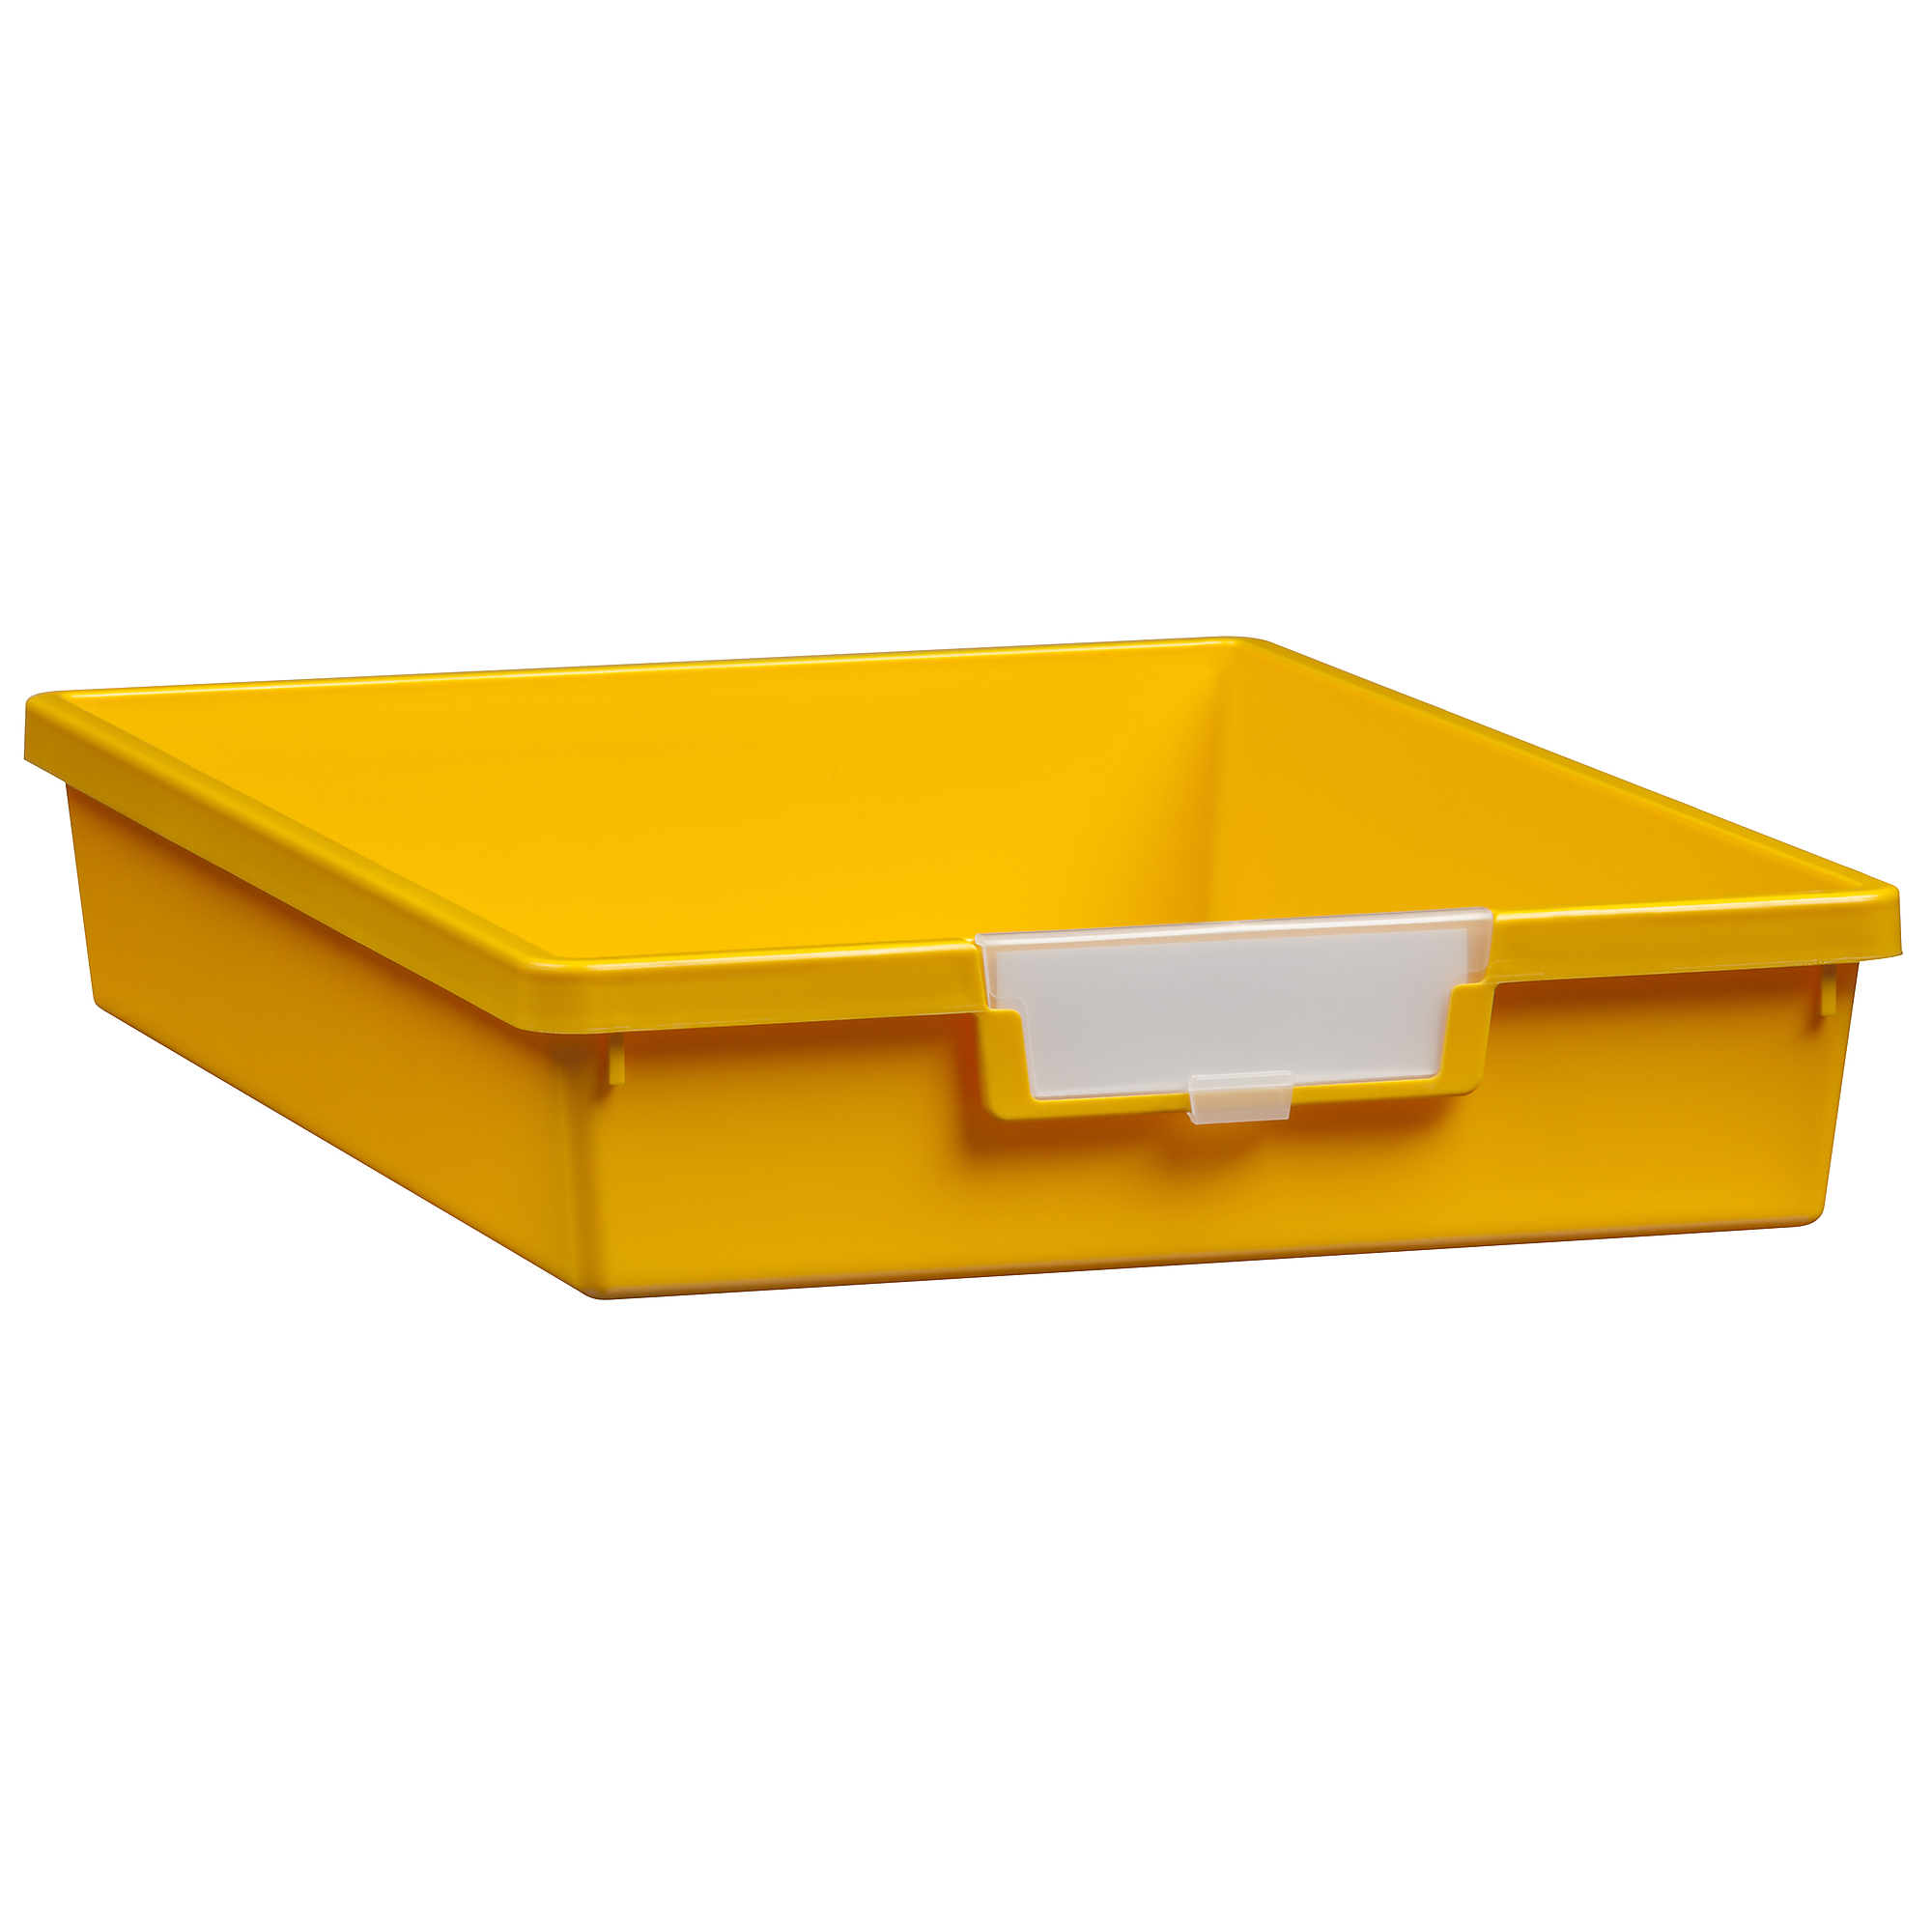 Certwood StorWerks, Slim Line 3Inch Tray in Primary Yellow-3PK, Included (qty.) 3 Height 3 in, Model CE1950PY3